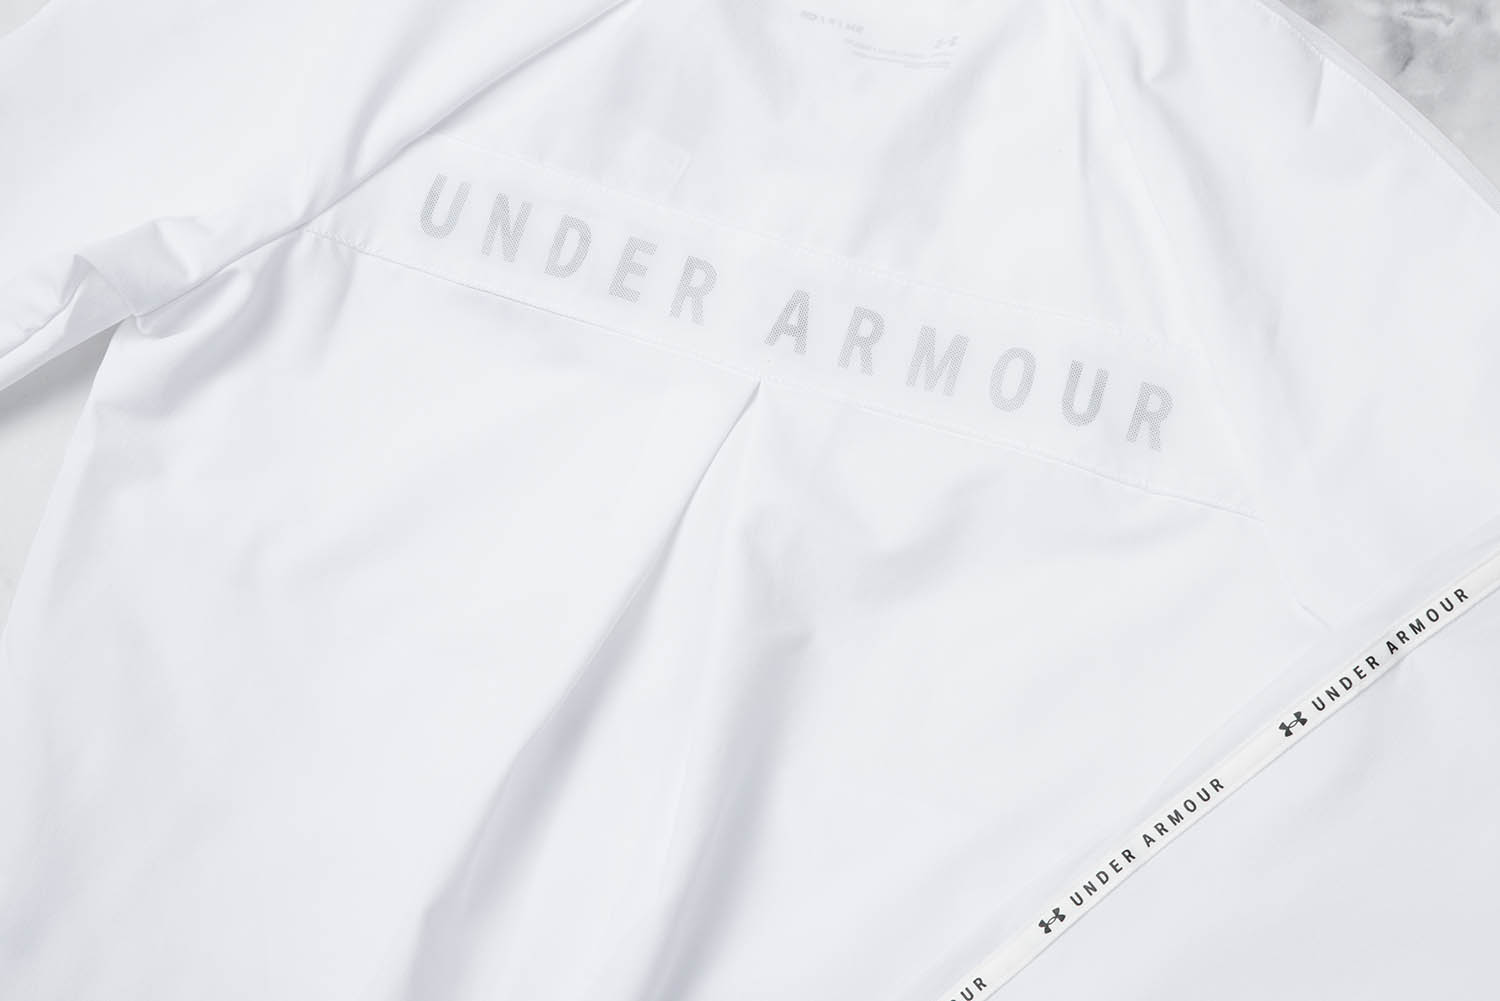 under-armour-asia-limited-series-details-04